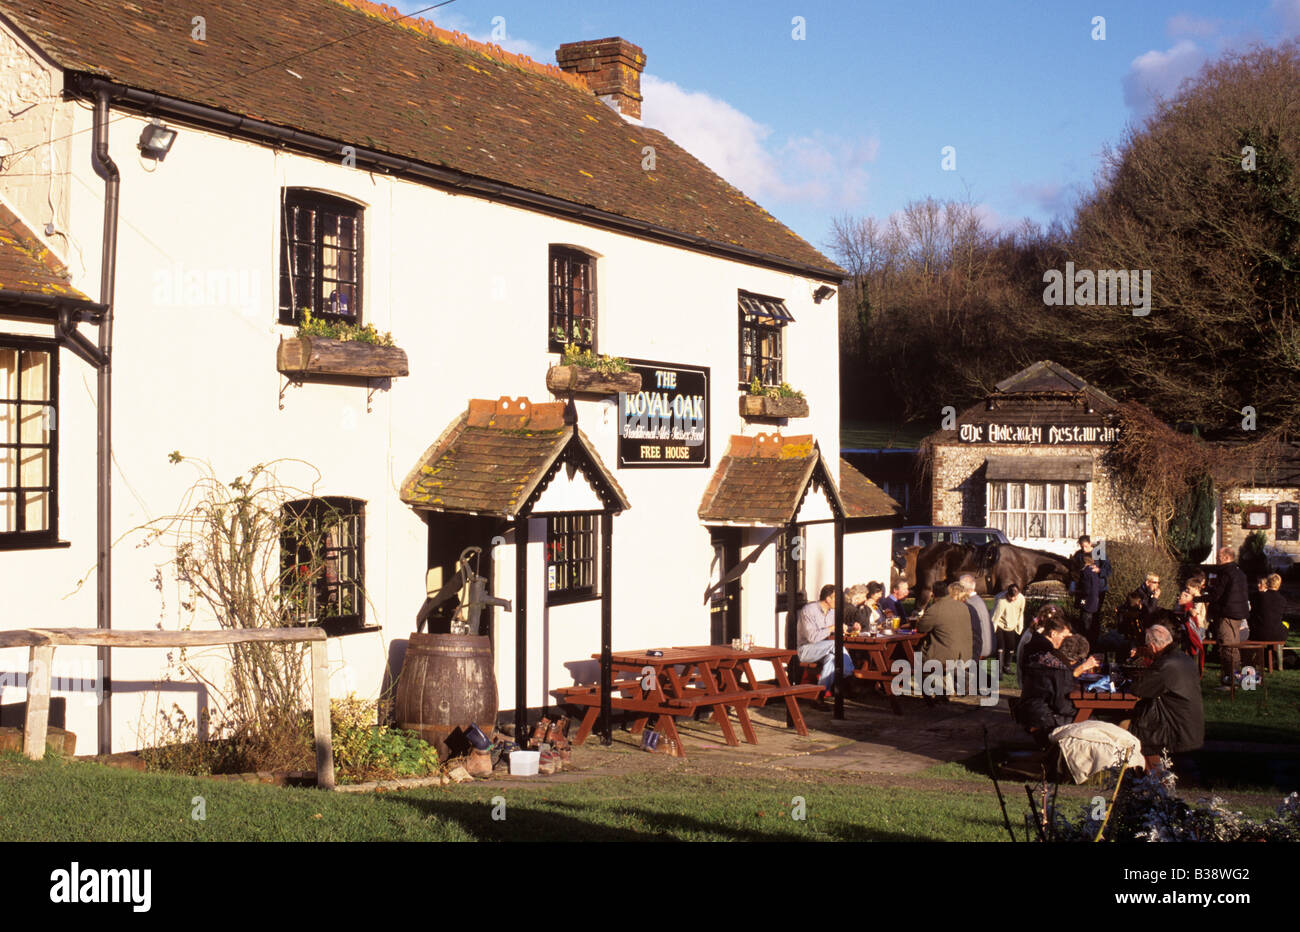 People sitting outside Royal Oak traditional English country pub said to be haunted. Hooksway Chilgrove West Sussex England UK Britain Stock Photo